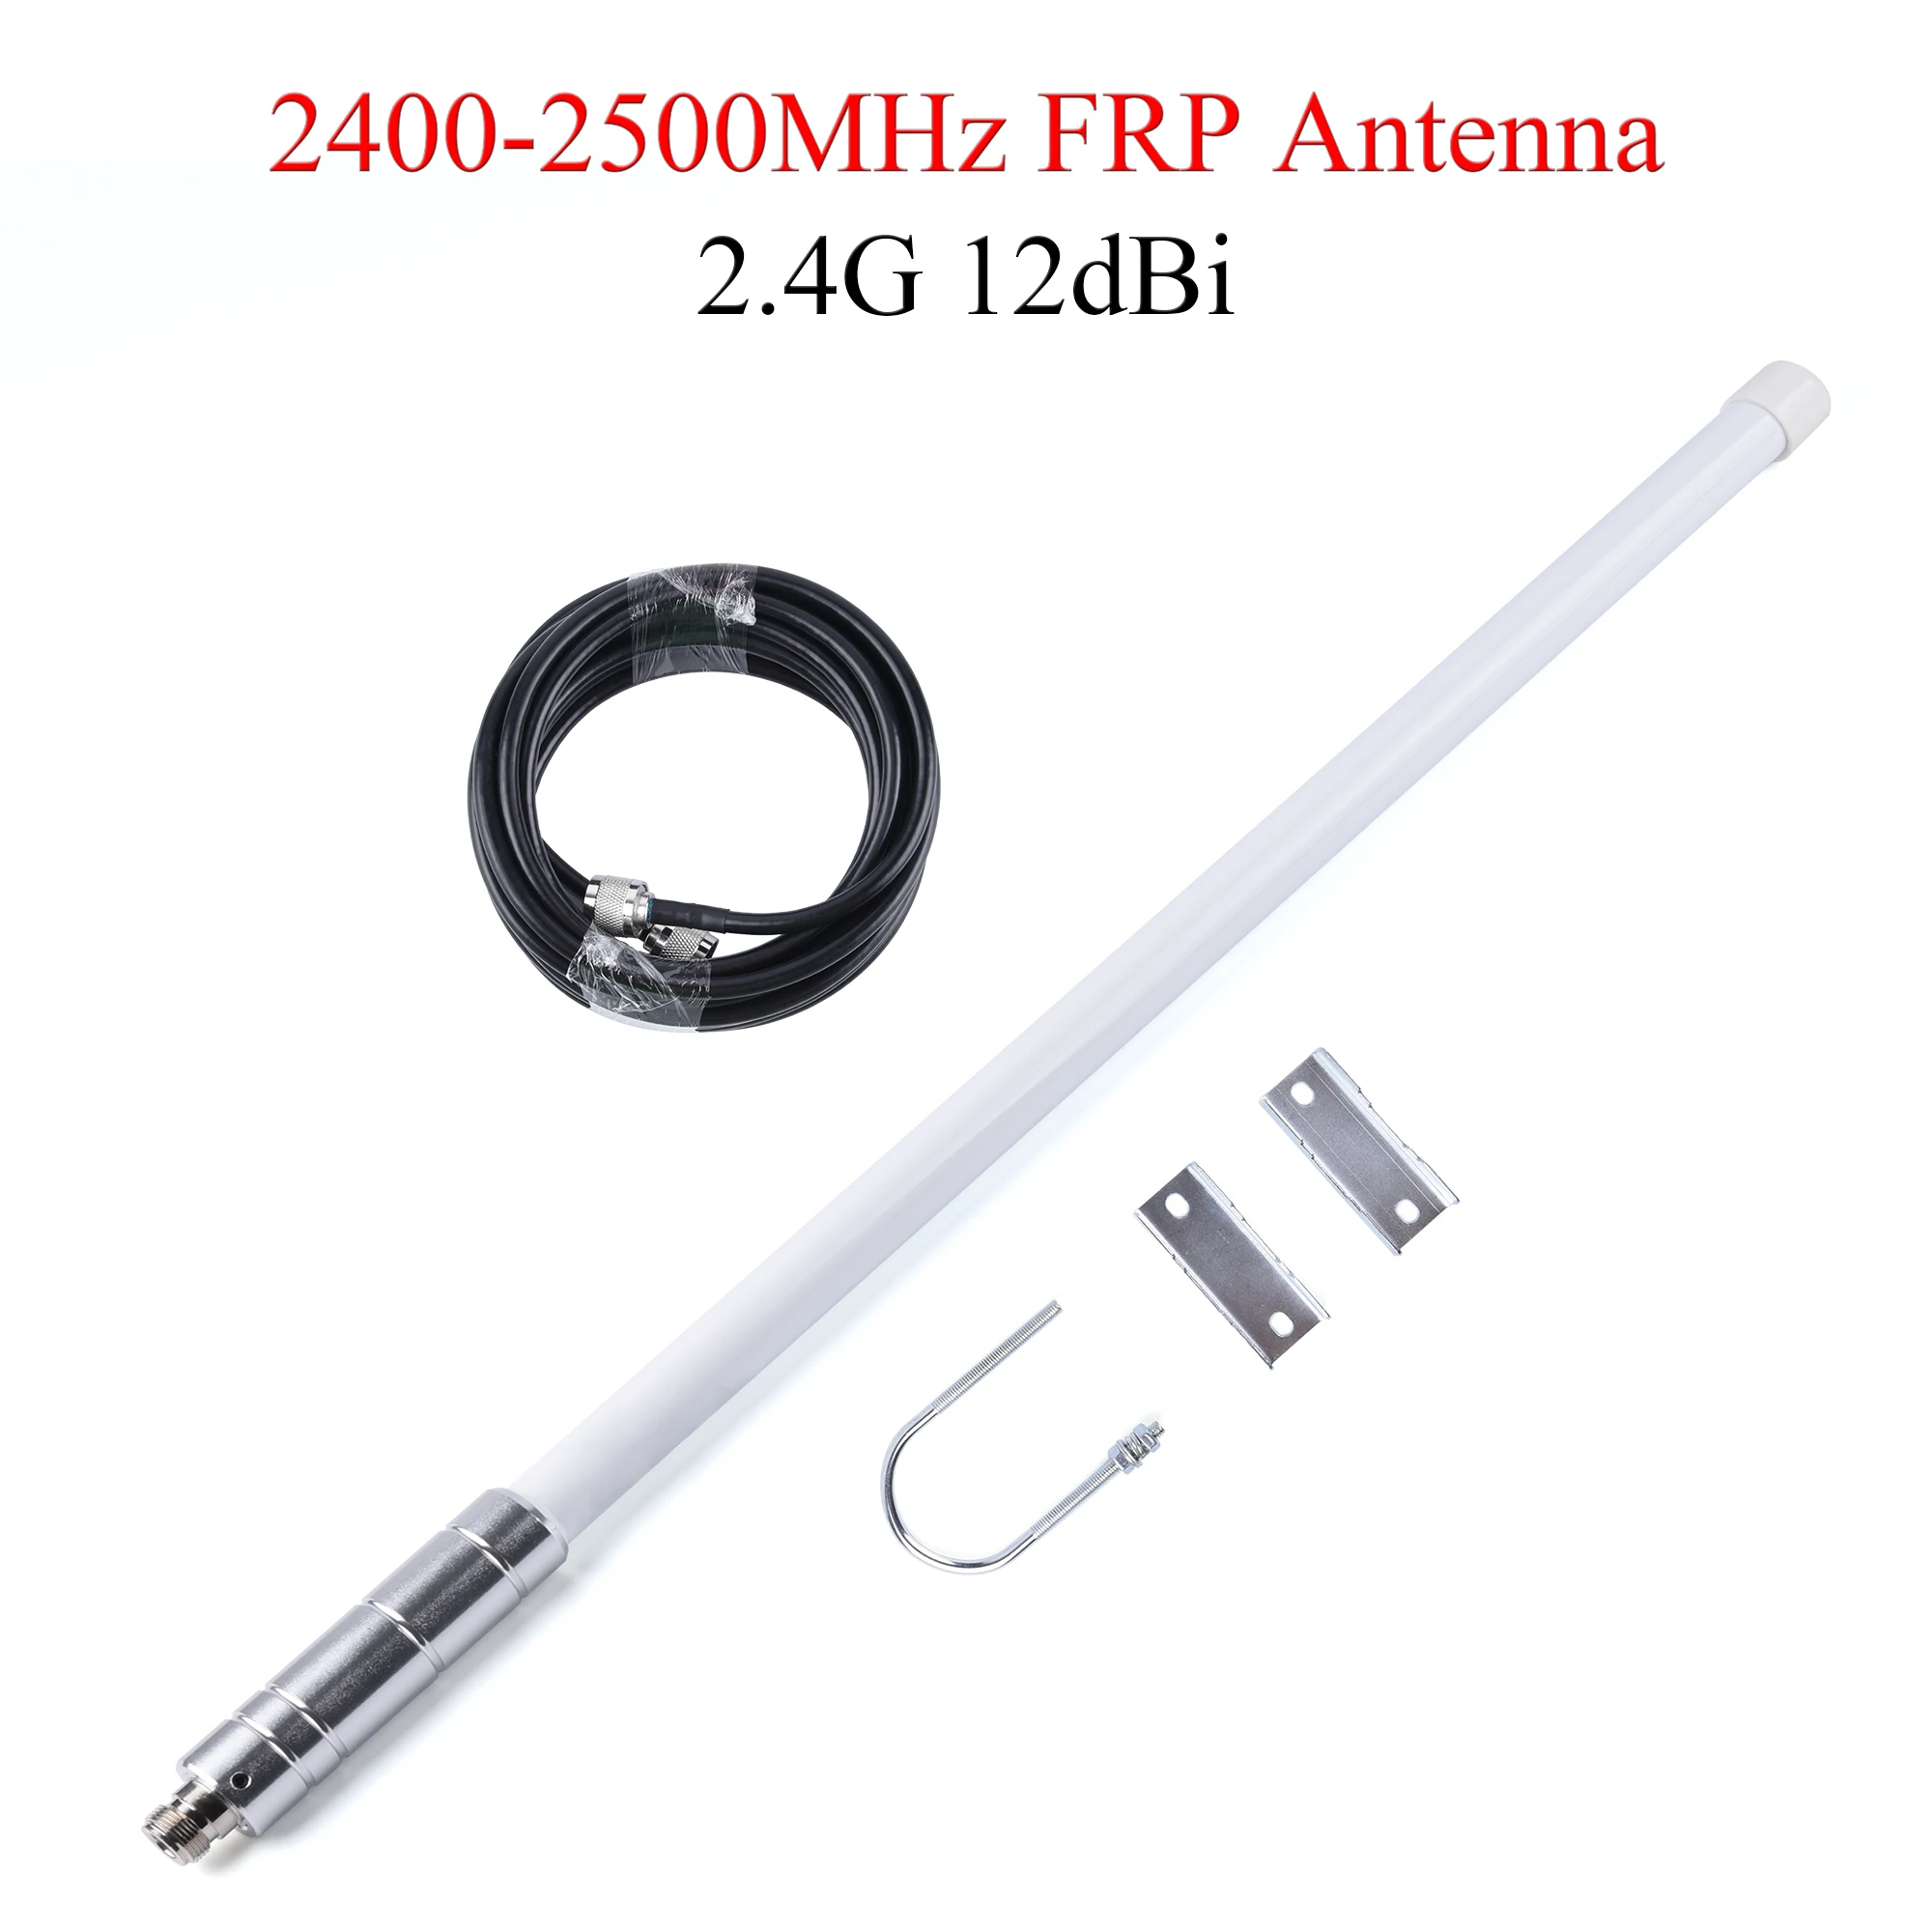 2.4G 12dBi Antenna 2400-2500MHz FRP Outdoor Wireless Communication Antenna N Female For Router Booster Amplifier Modem